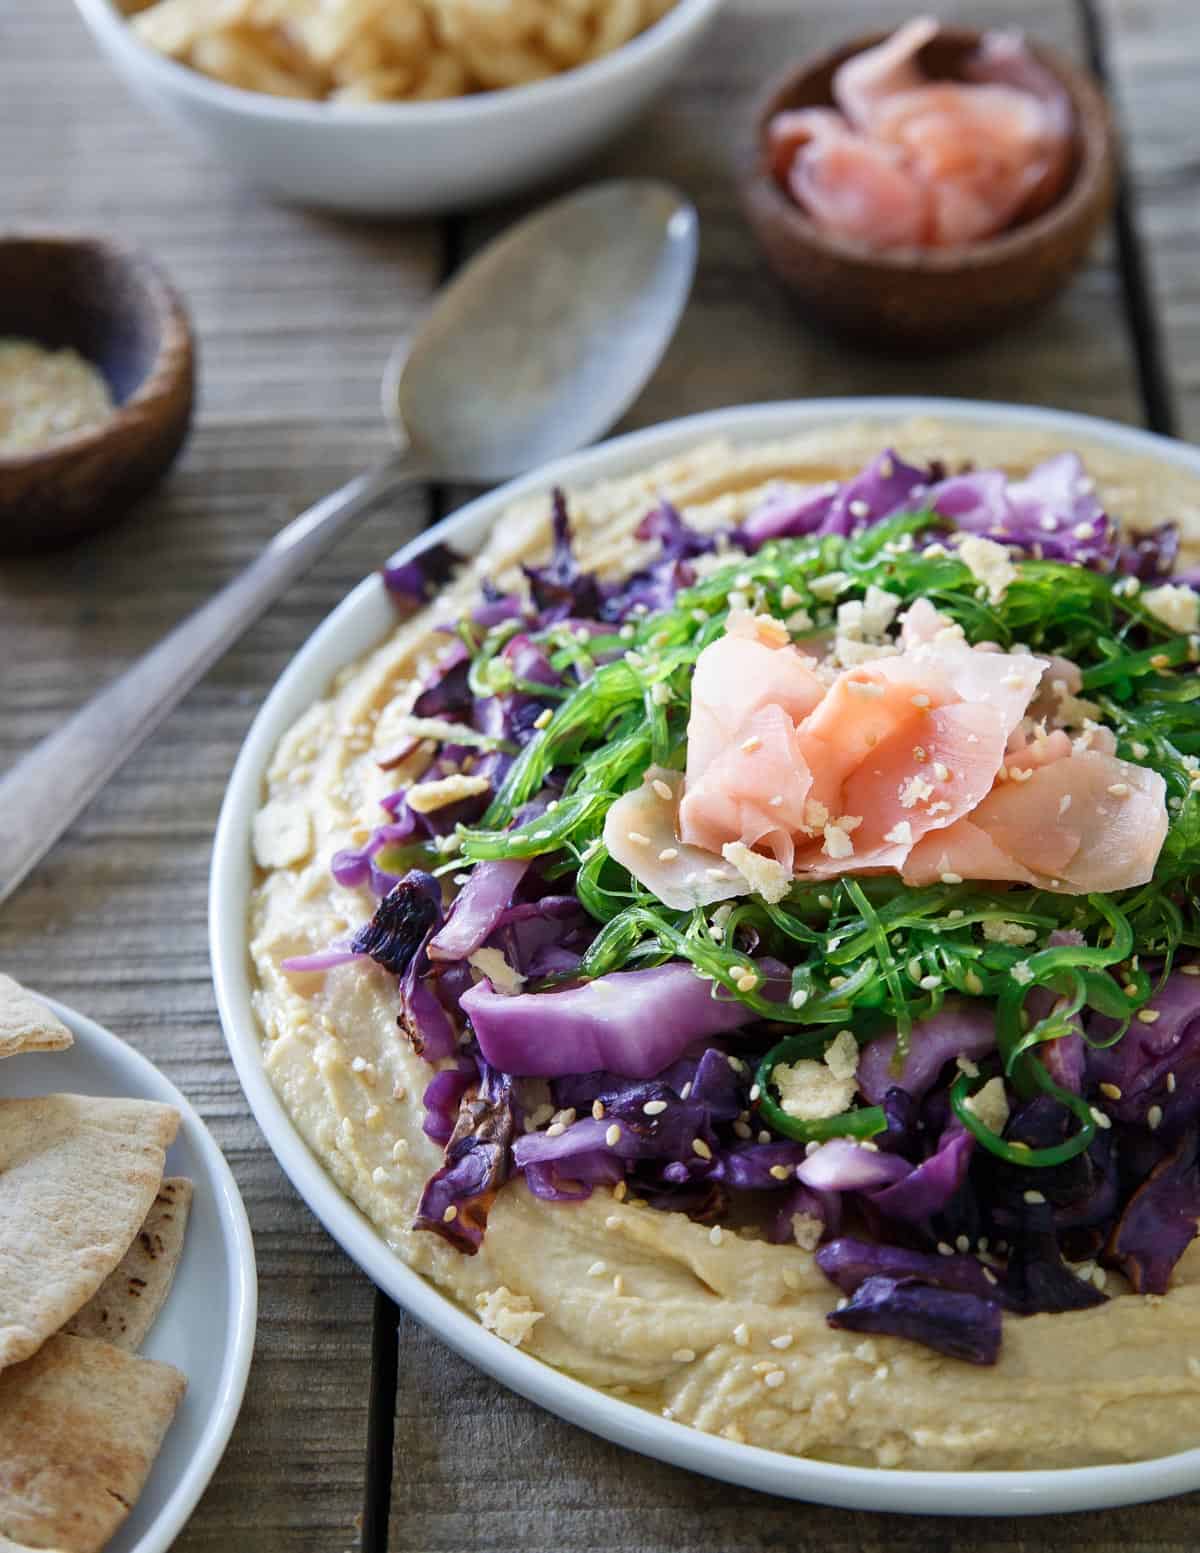 This Asian hummus platter topped with sesame cabbage, seaweed salad and pickled ginger is one tasty way to amp up your appetizer game.